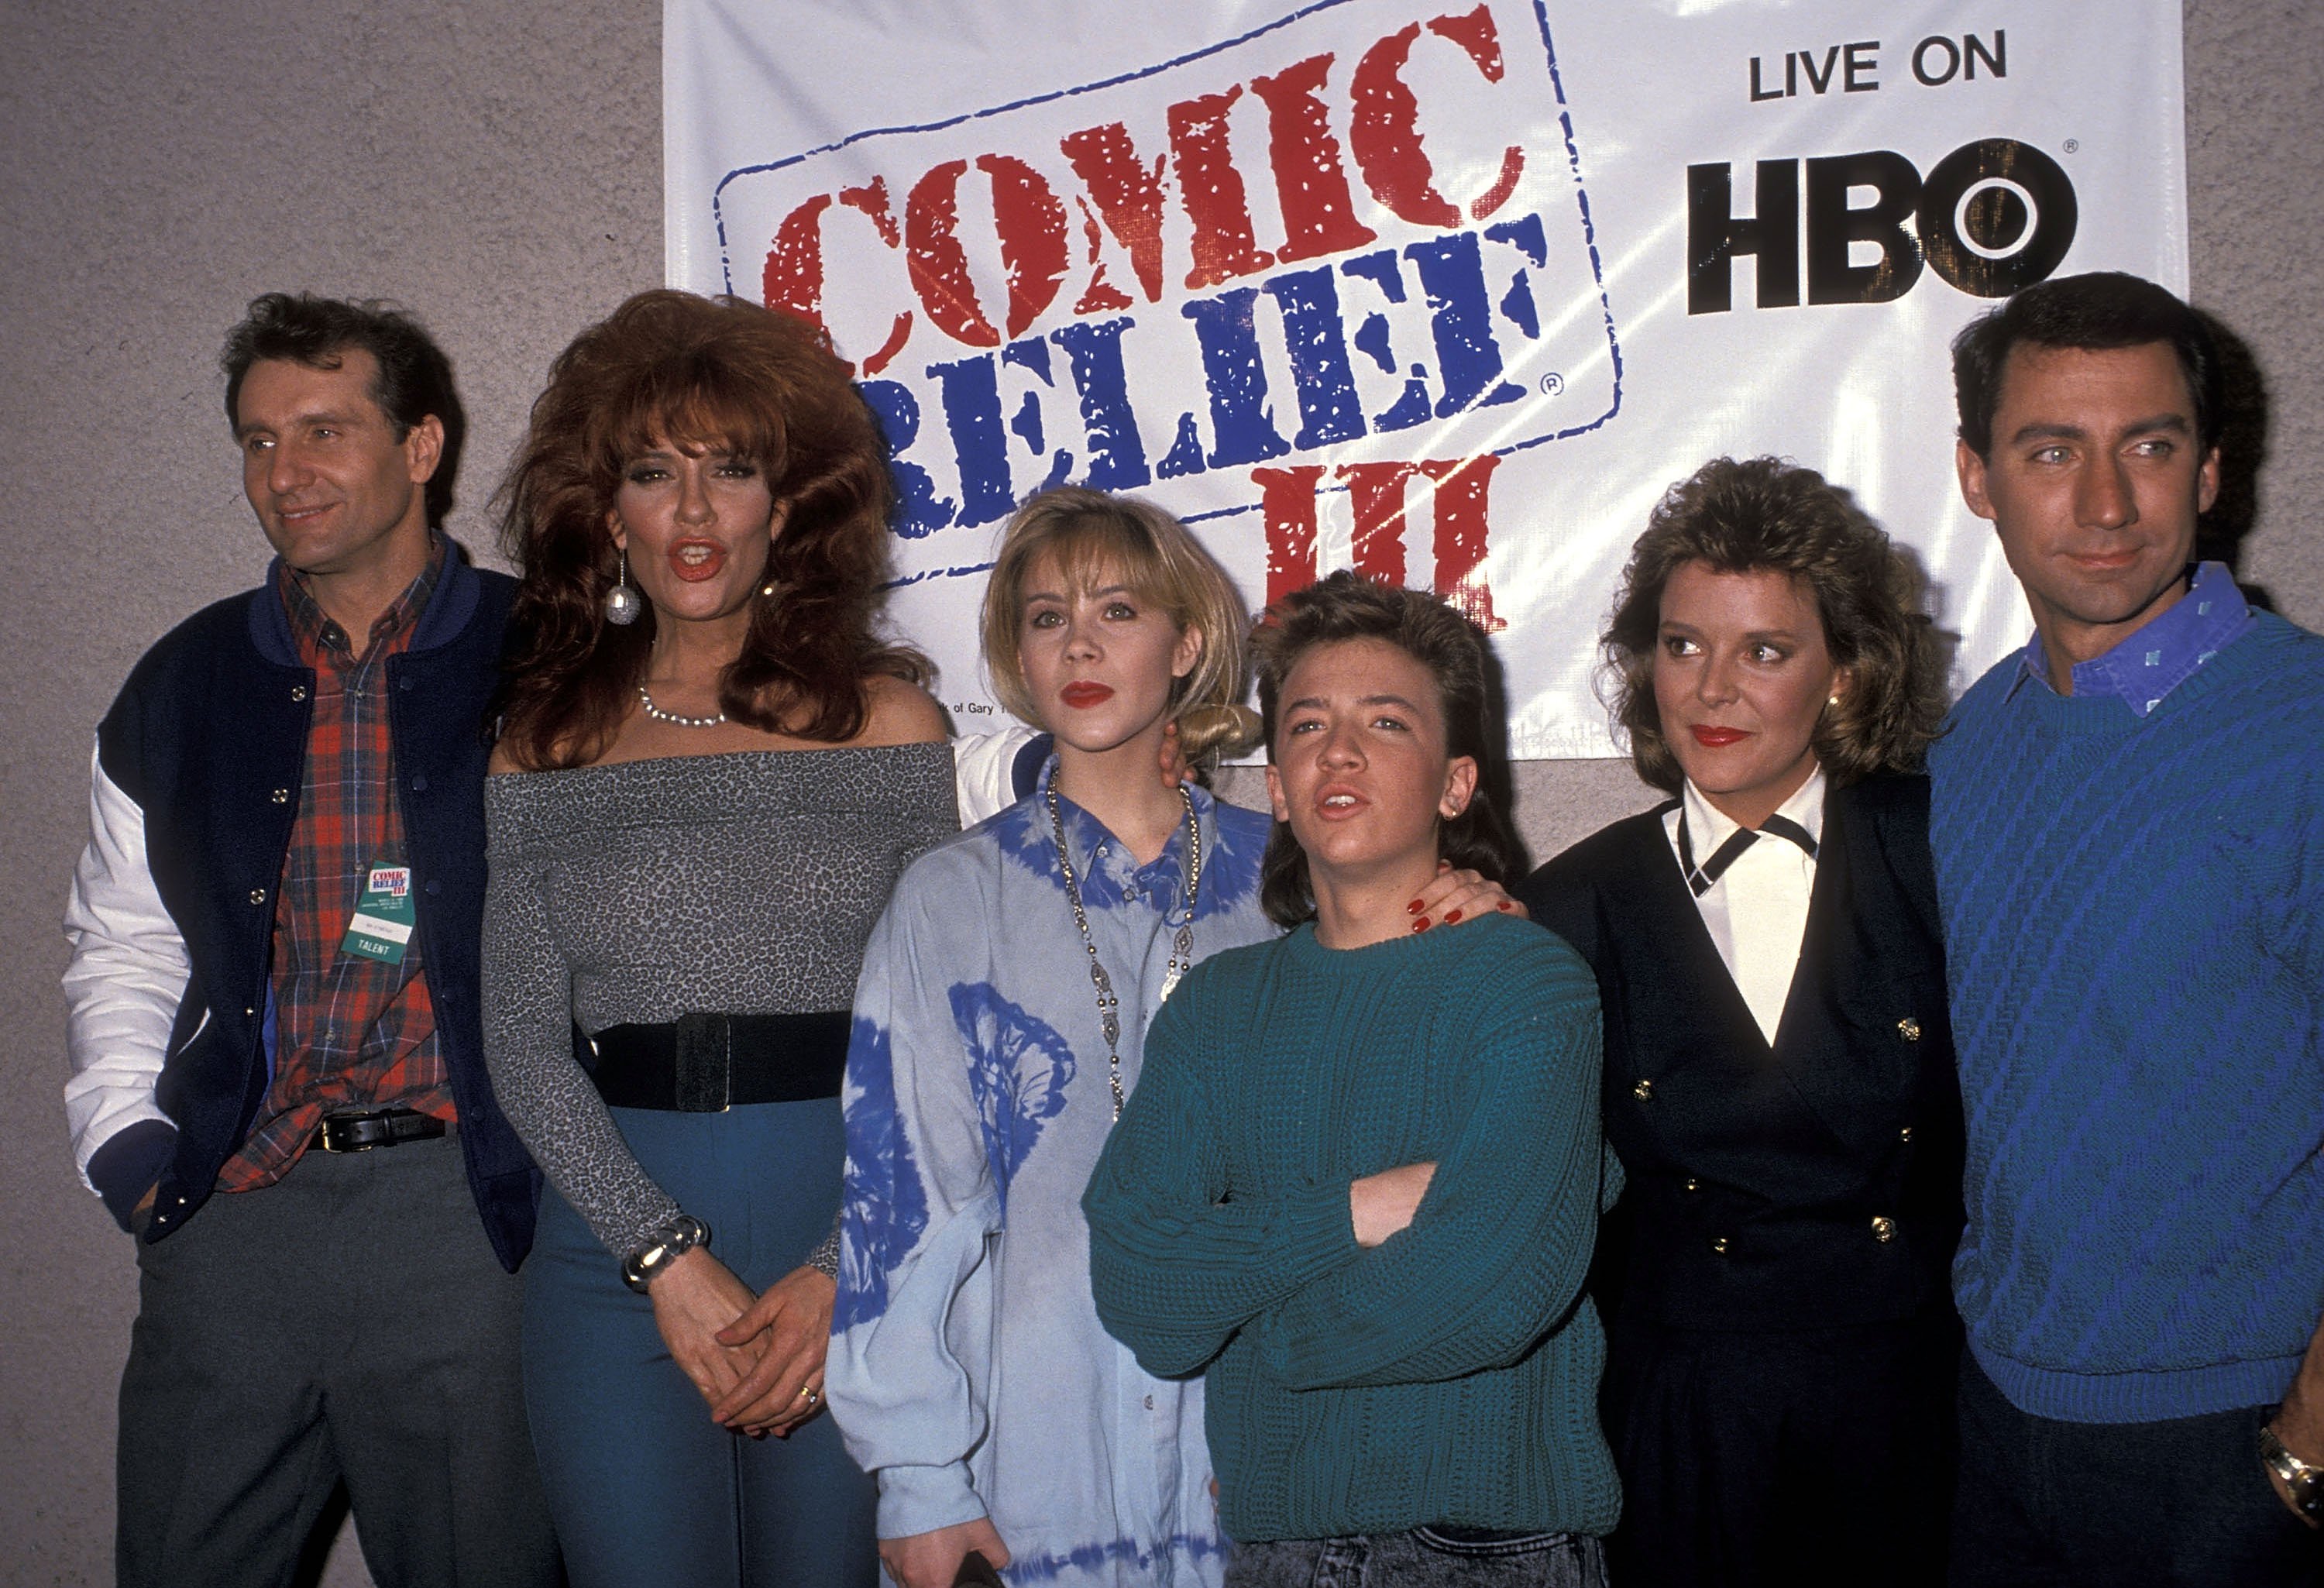 The cast of 'Married...with Children' post for a photo backstage at the 1989 HBO special 'Comic Relief.'